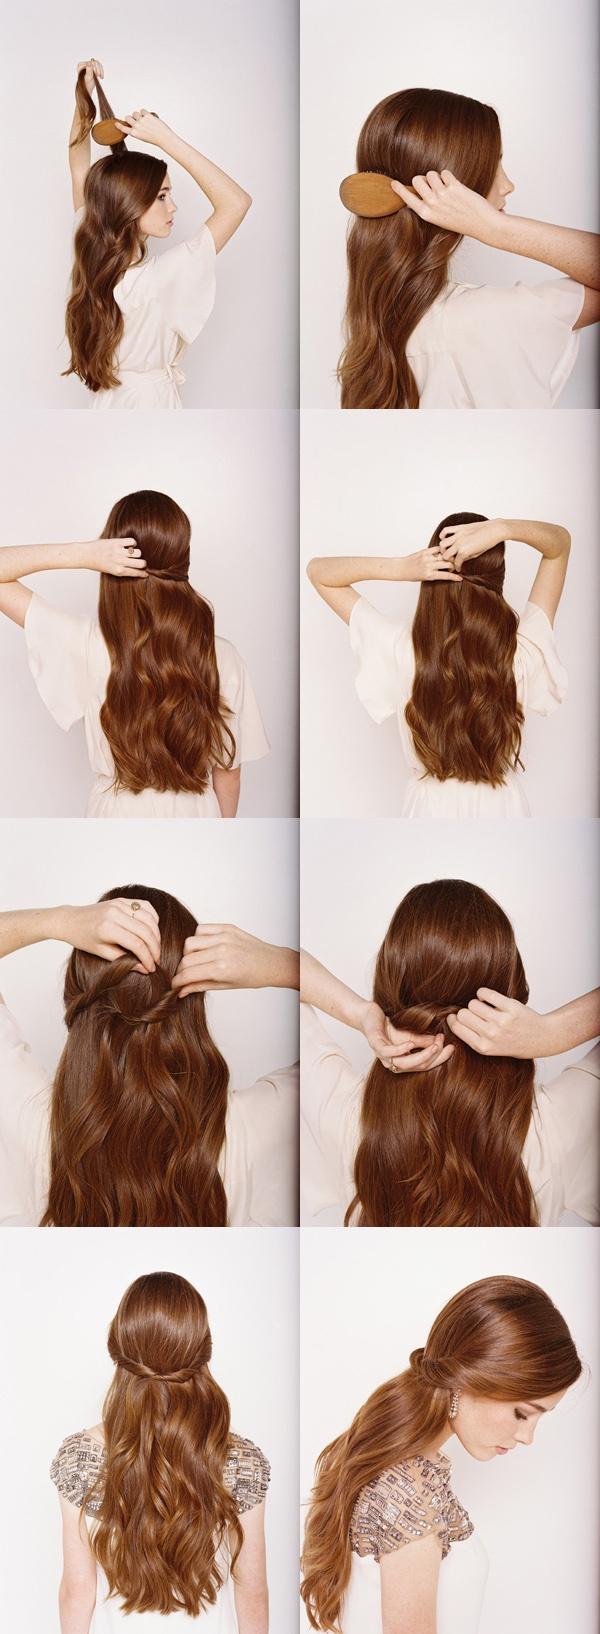 19-Great-Tutorials-for-Perfect-Hairstyles-13